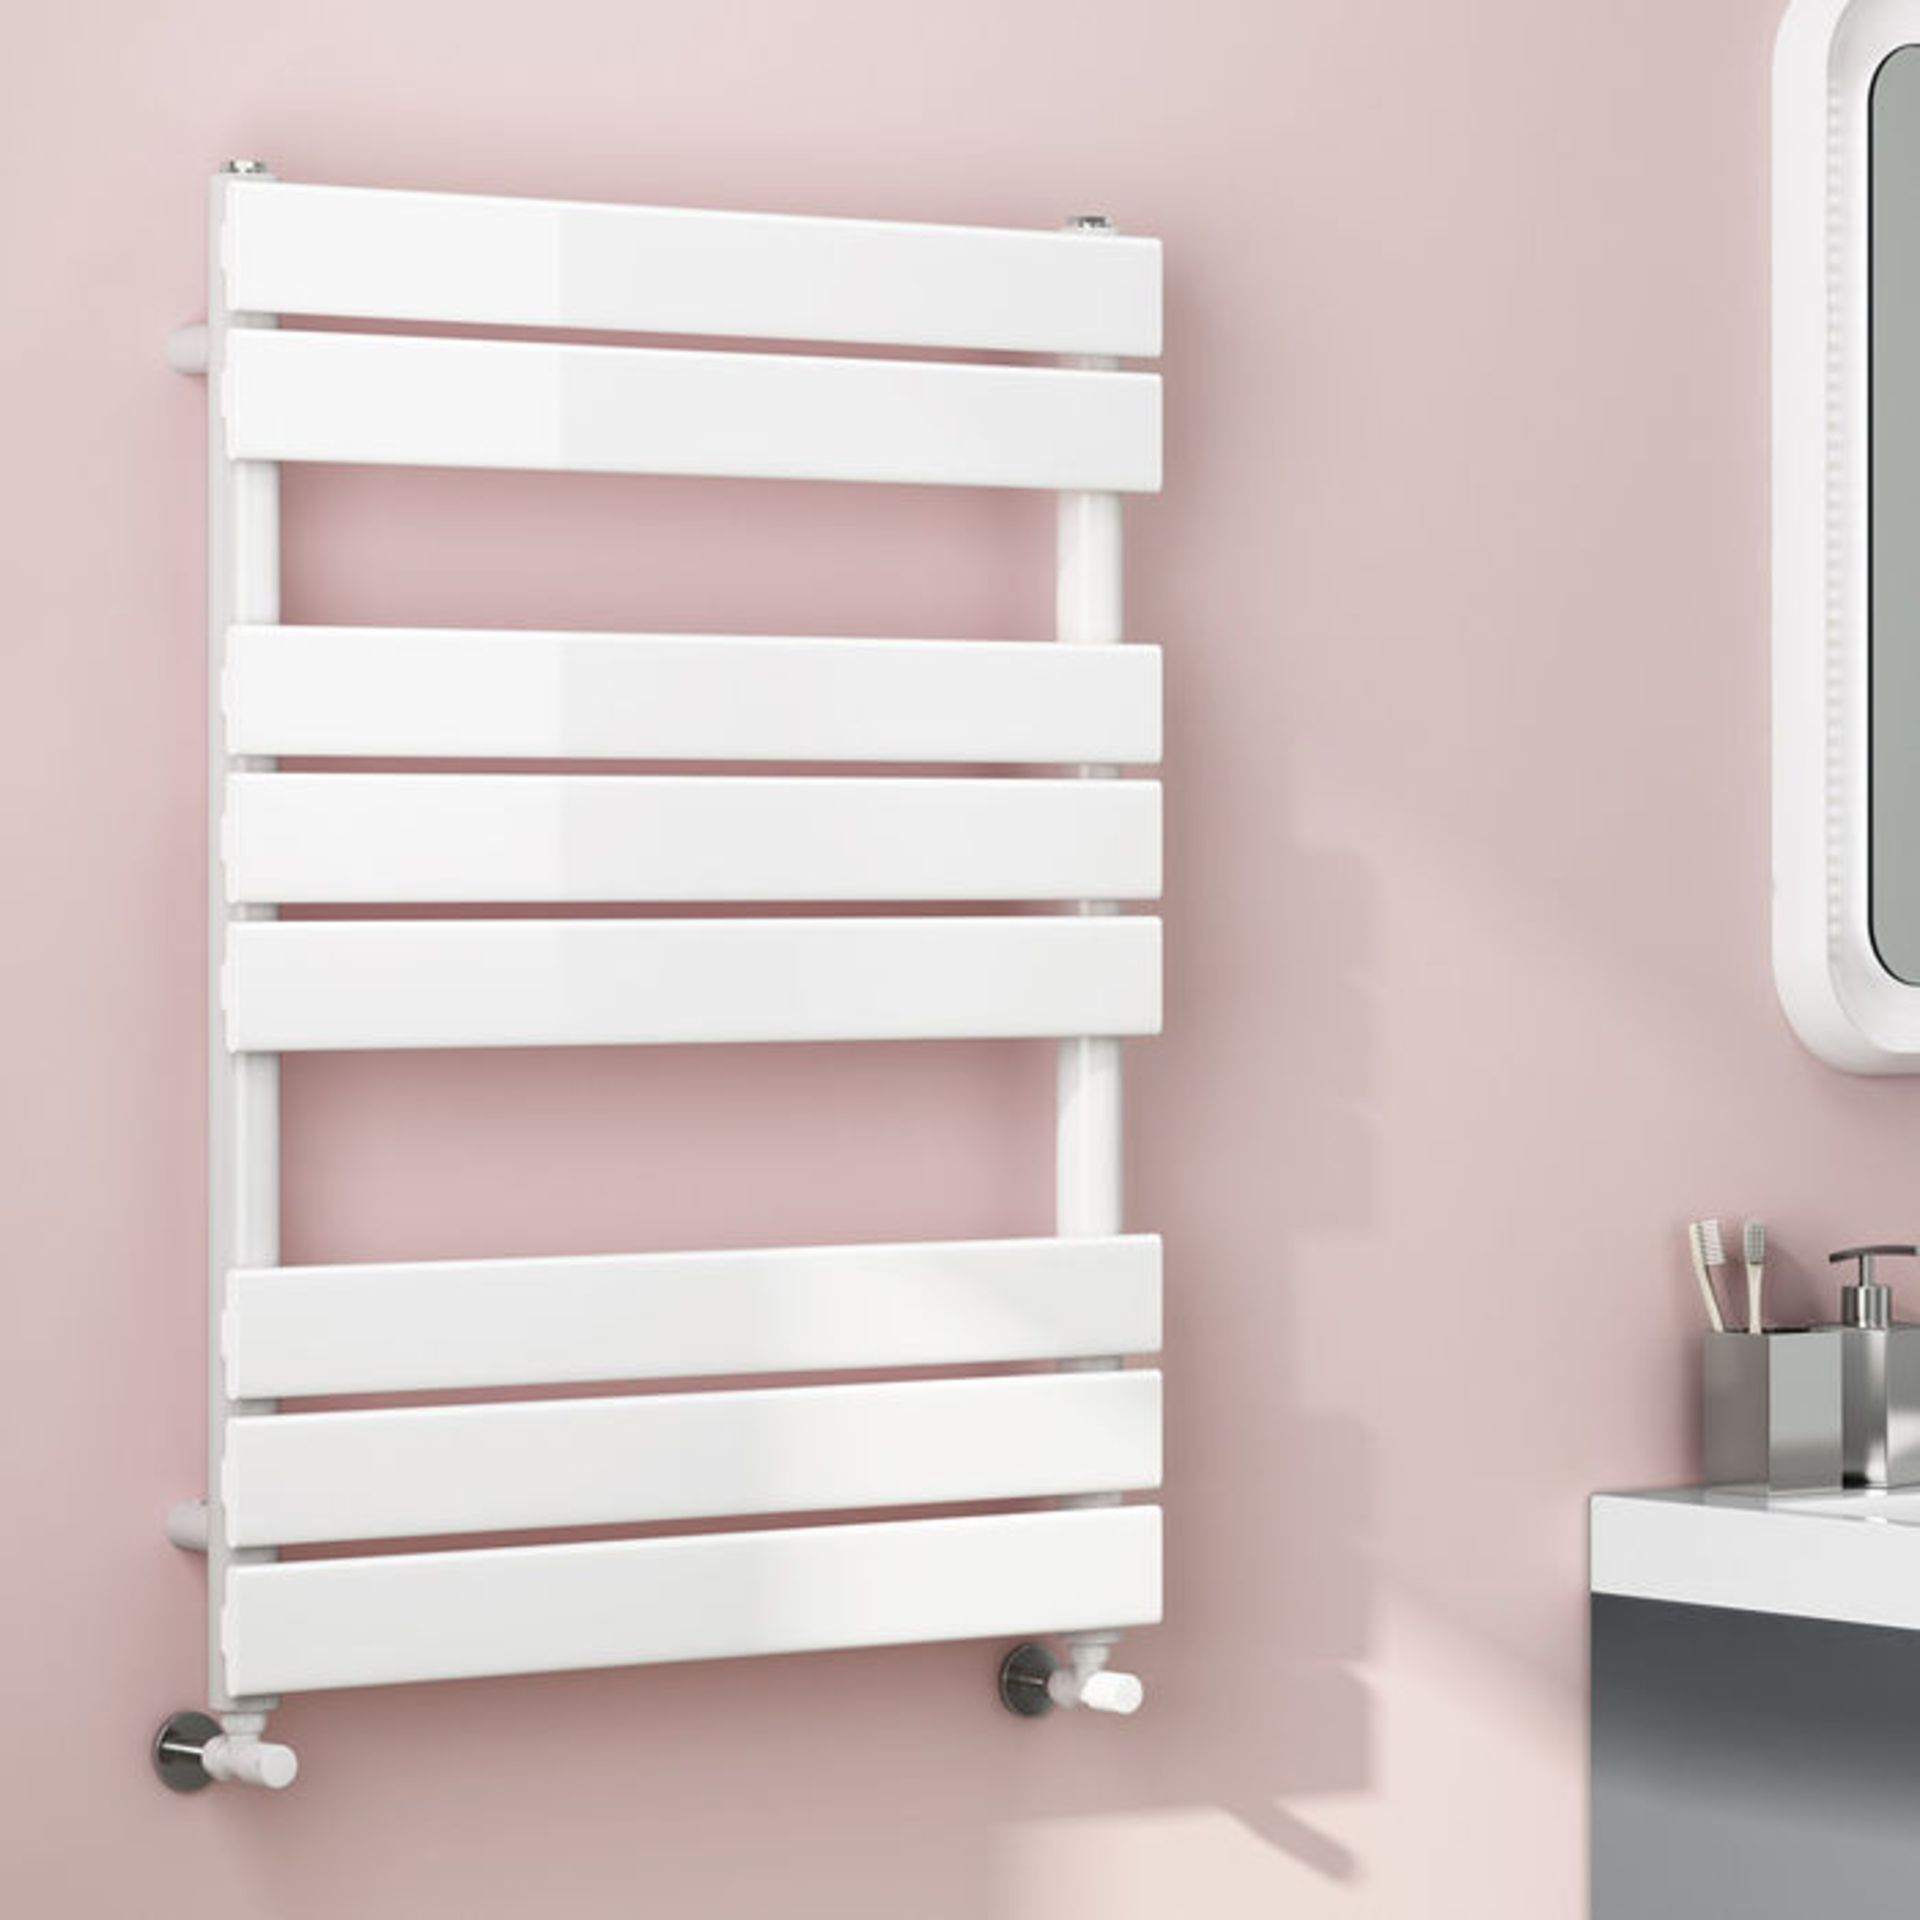 (H46) 800x600mm White Flat Panel Ladder Towel Radiator RRP £176.99 Low carbon steel, high quality